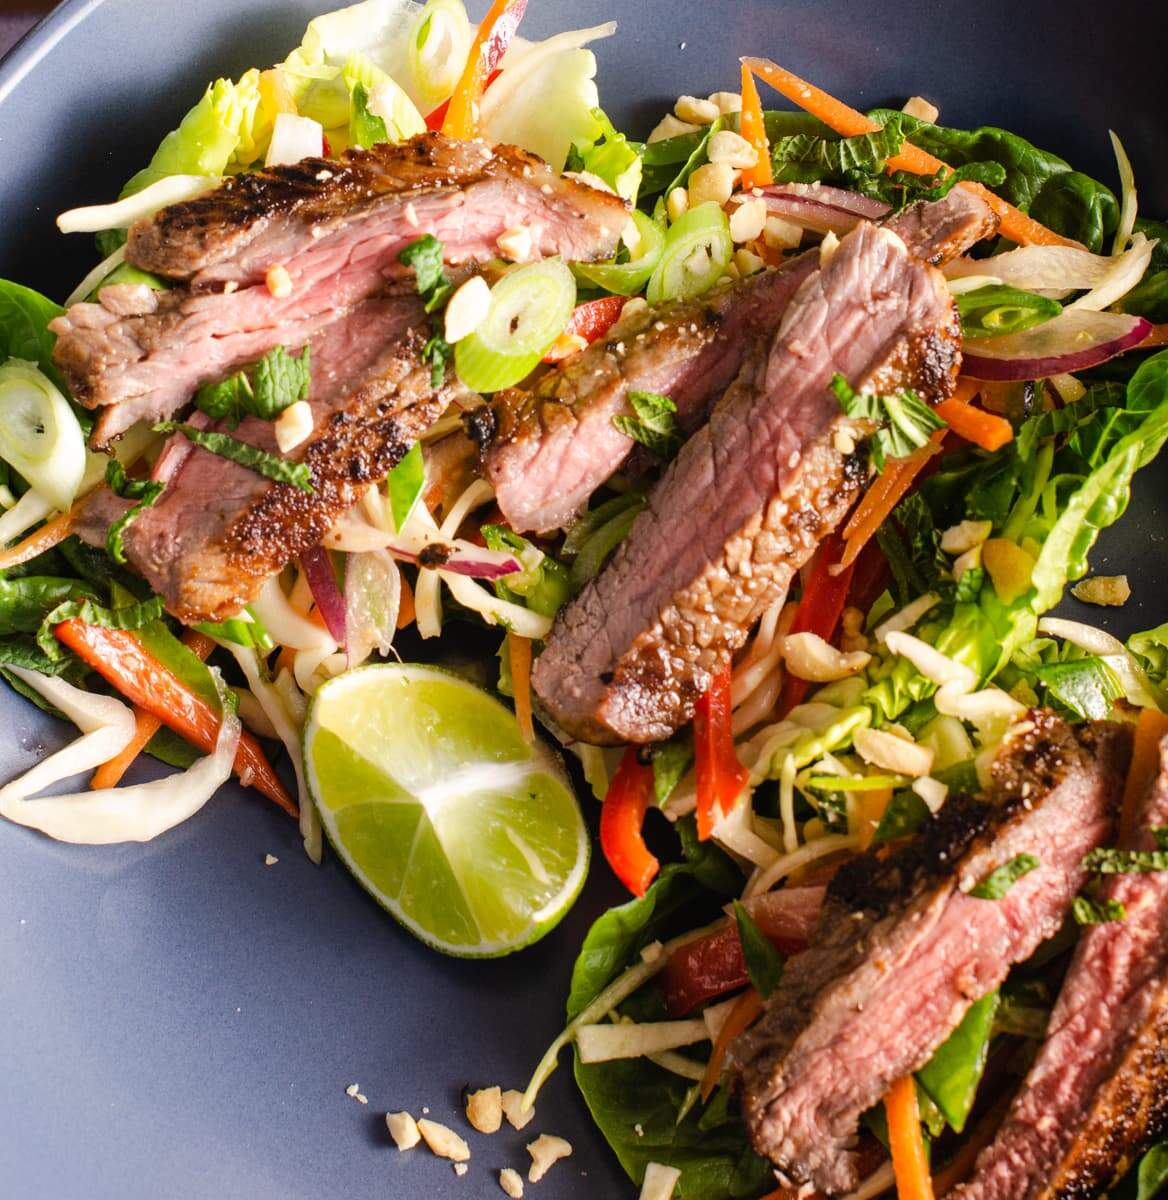 Slices of Asian marinated beef on a colourful slaw base with a wedge of lime.